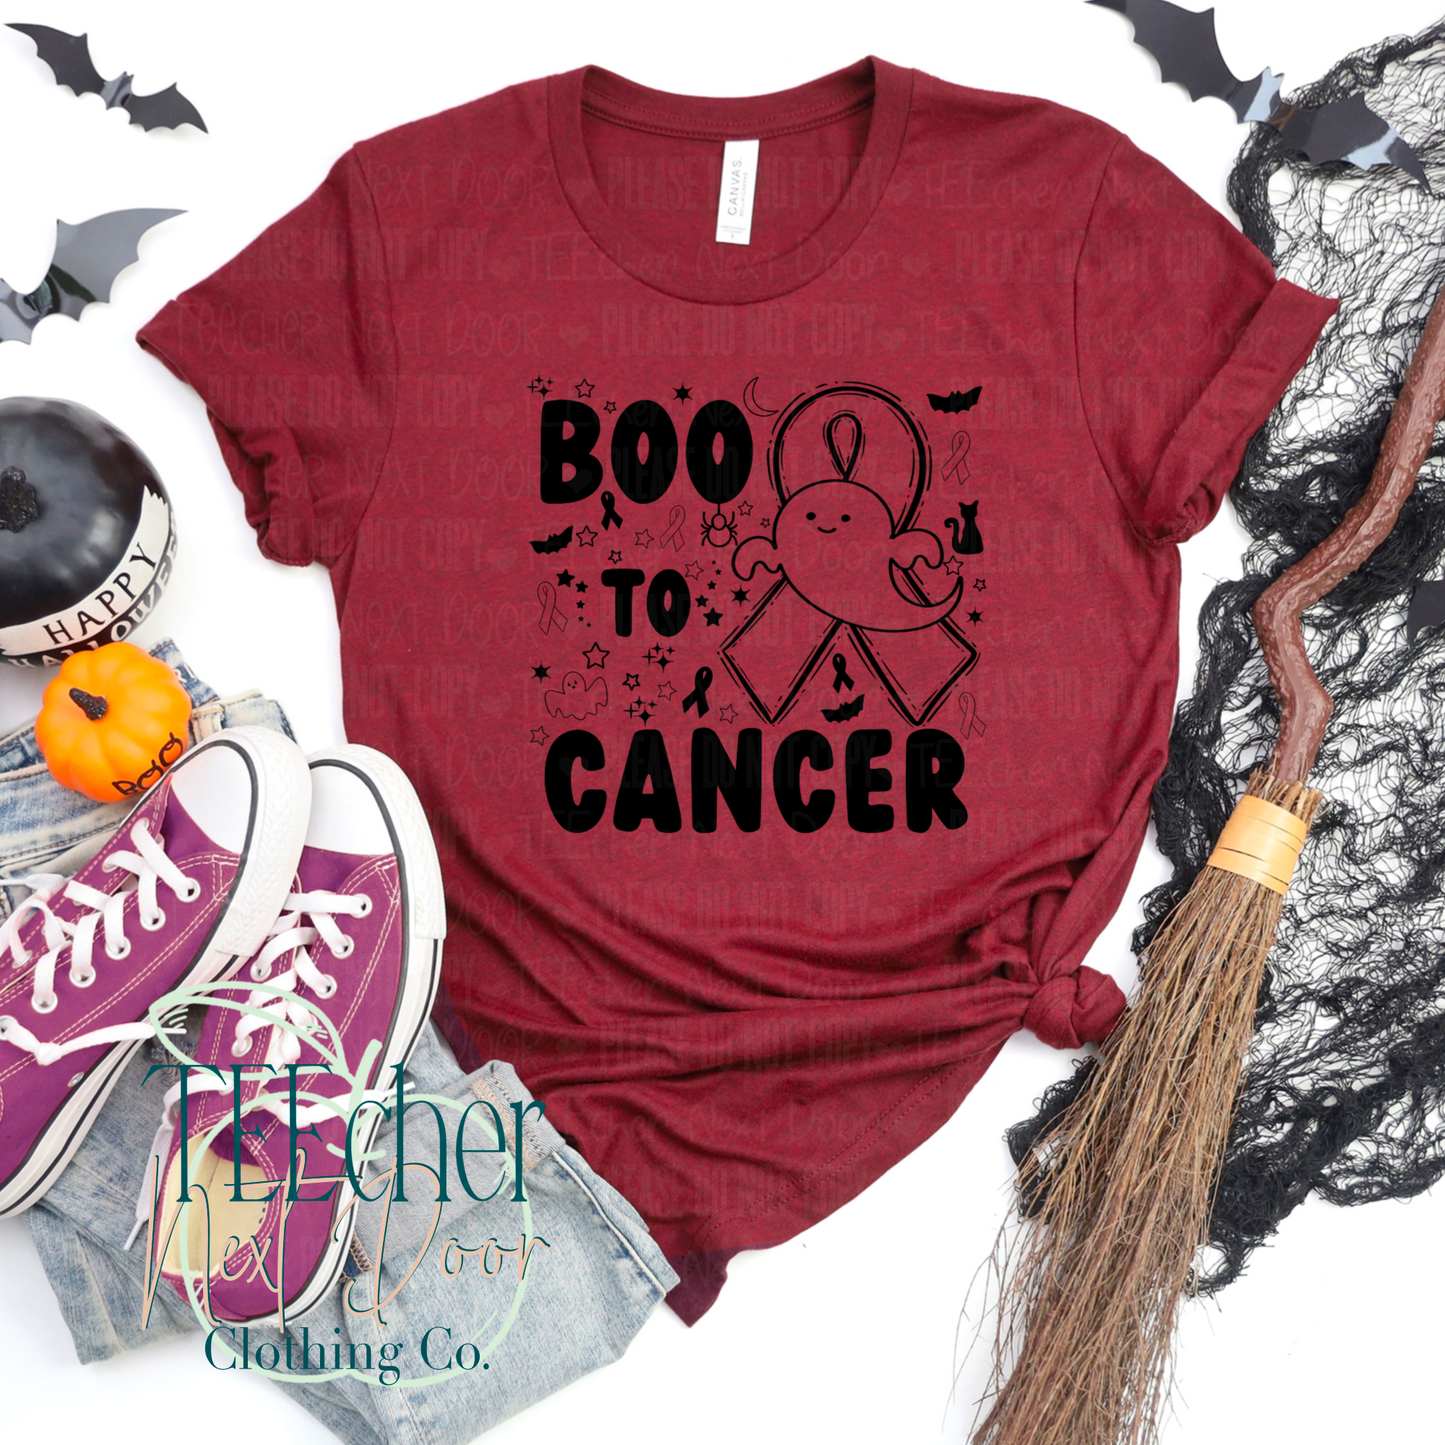 BOO to Cancer!